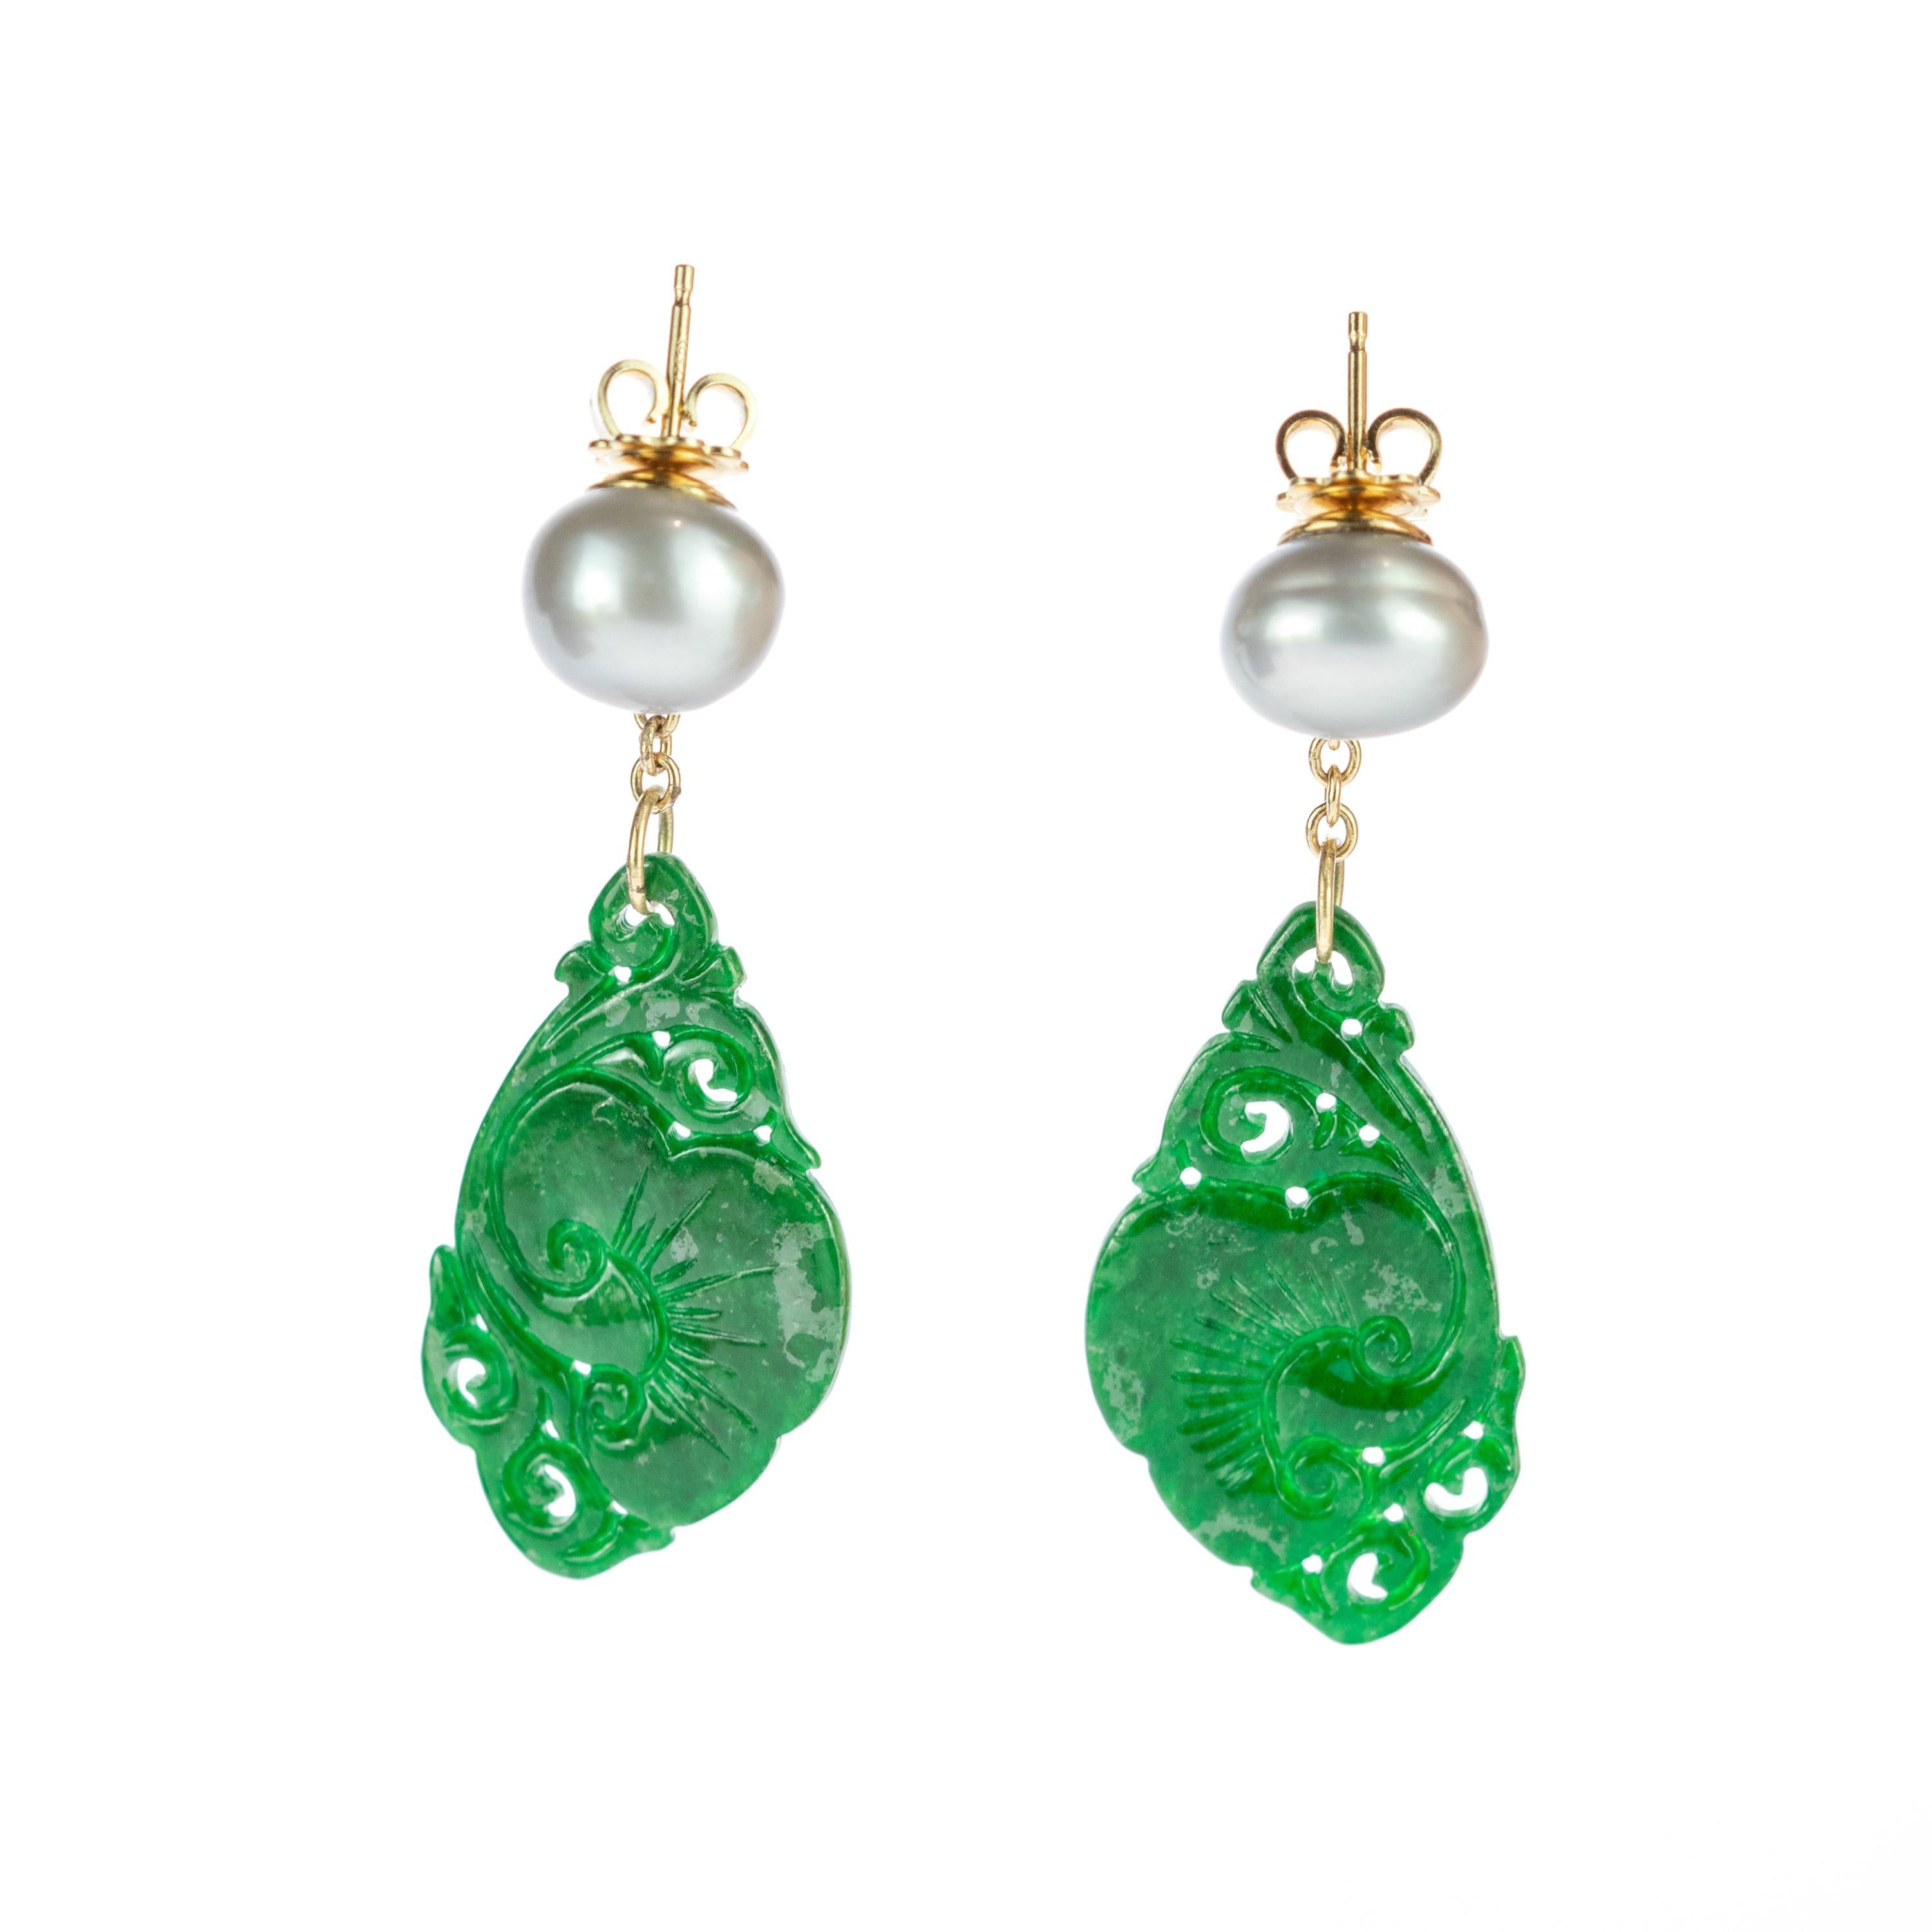 A stunning artisan 18 karat yellow gold italian drop and dangle earrings. Handmade gold chain that starts in a round 1.2 cm diamaeter pearls and ends in a traditional and unique natural carved jade stone. The green precious jade stone is carved in a